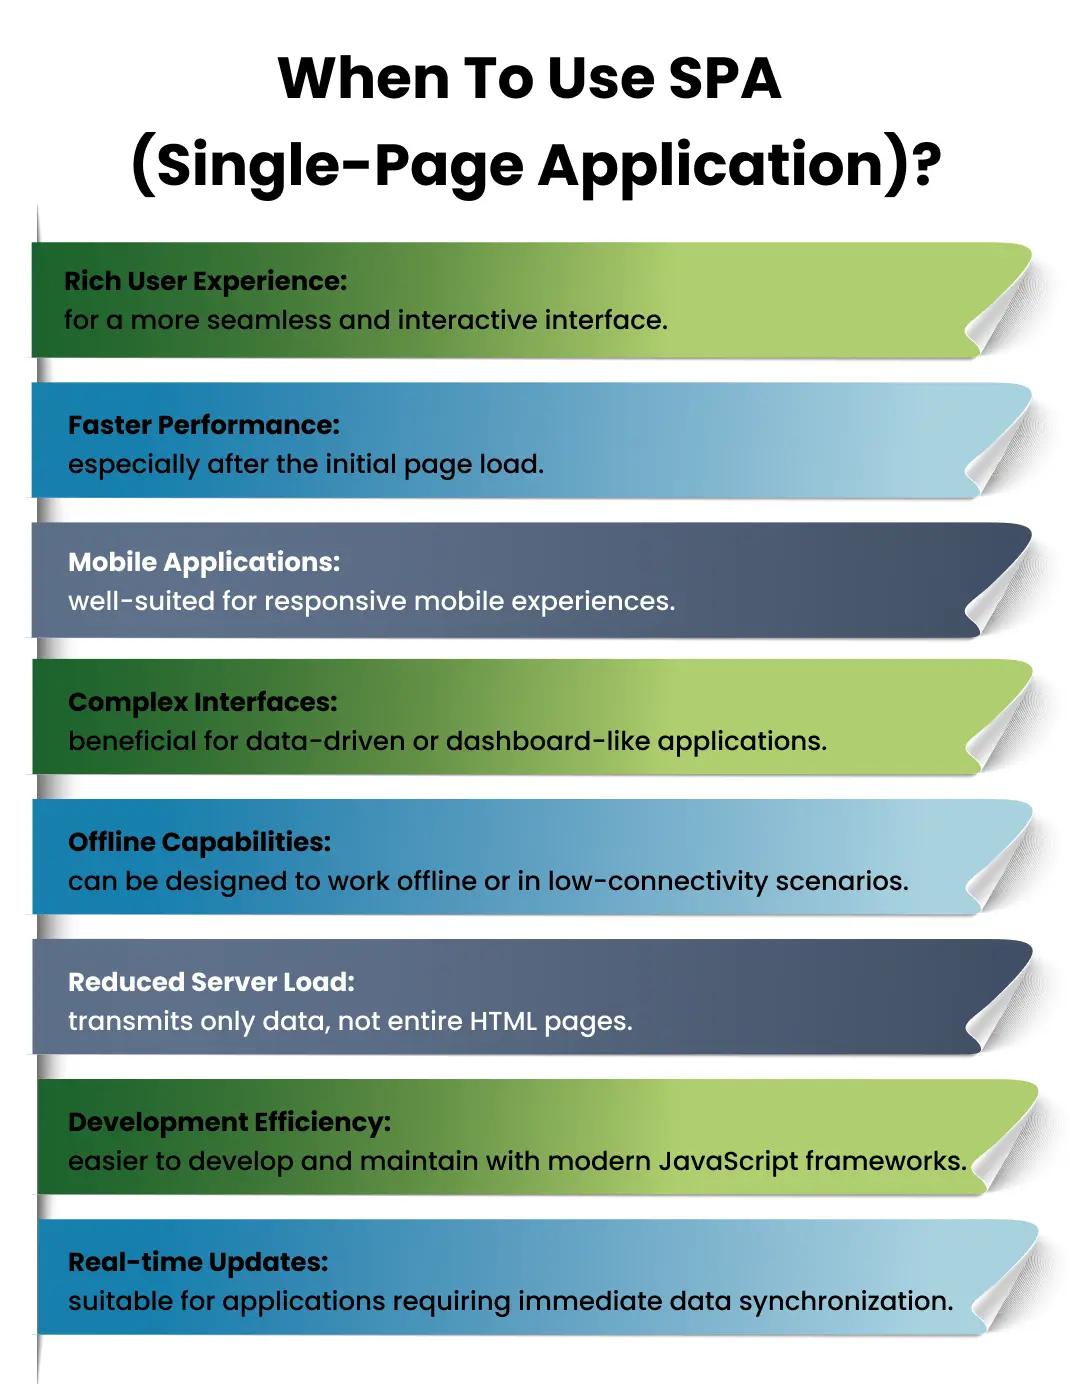 When To Use SPA (Single Page Application)